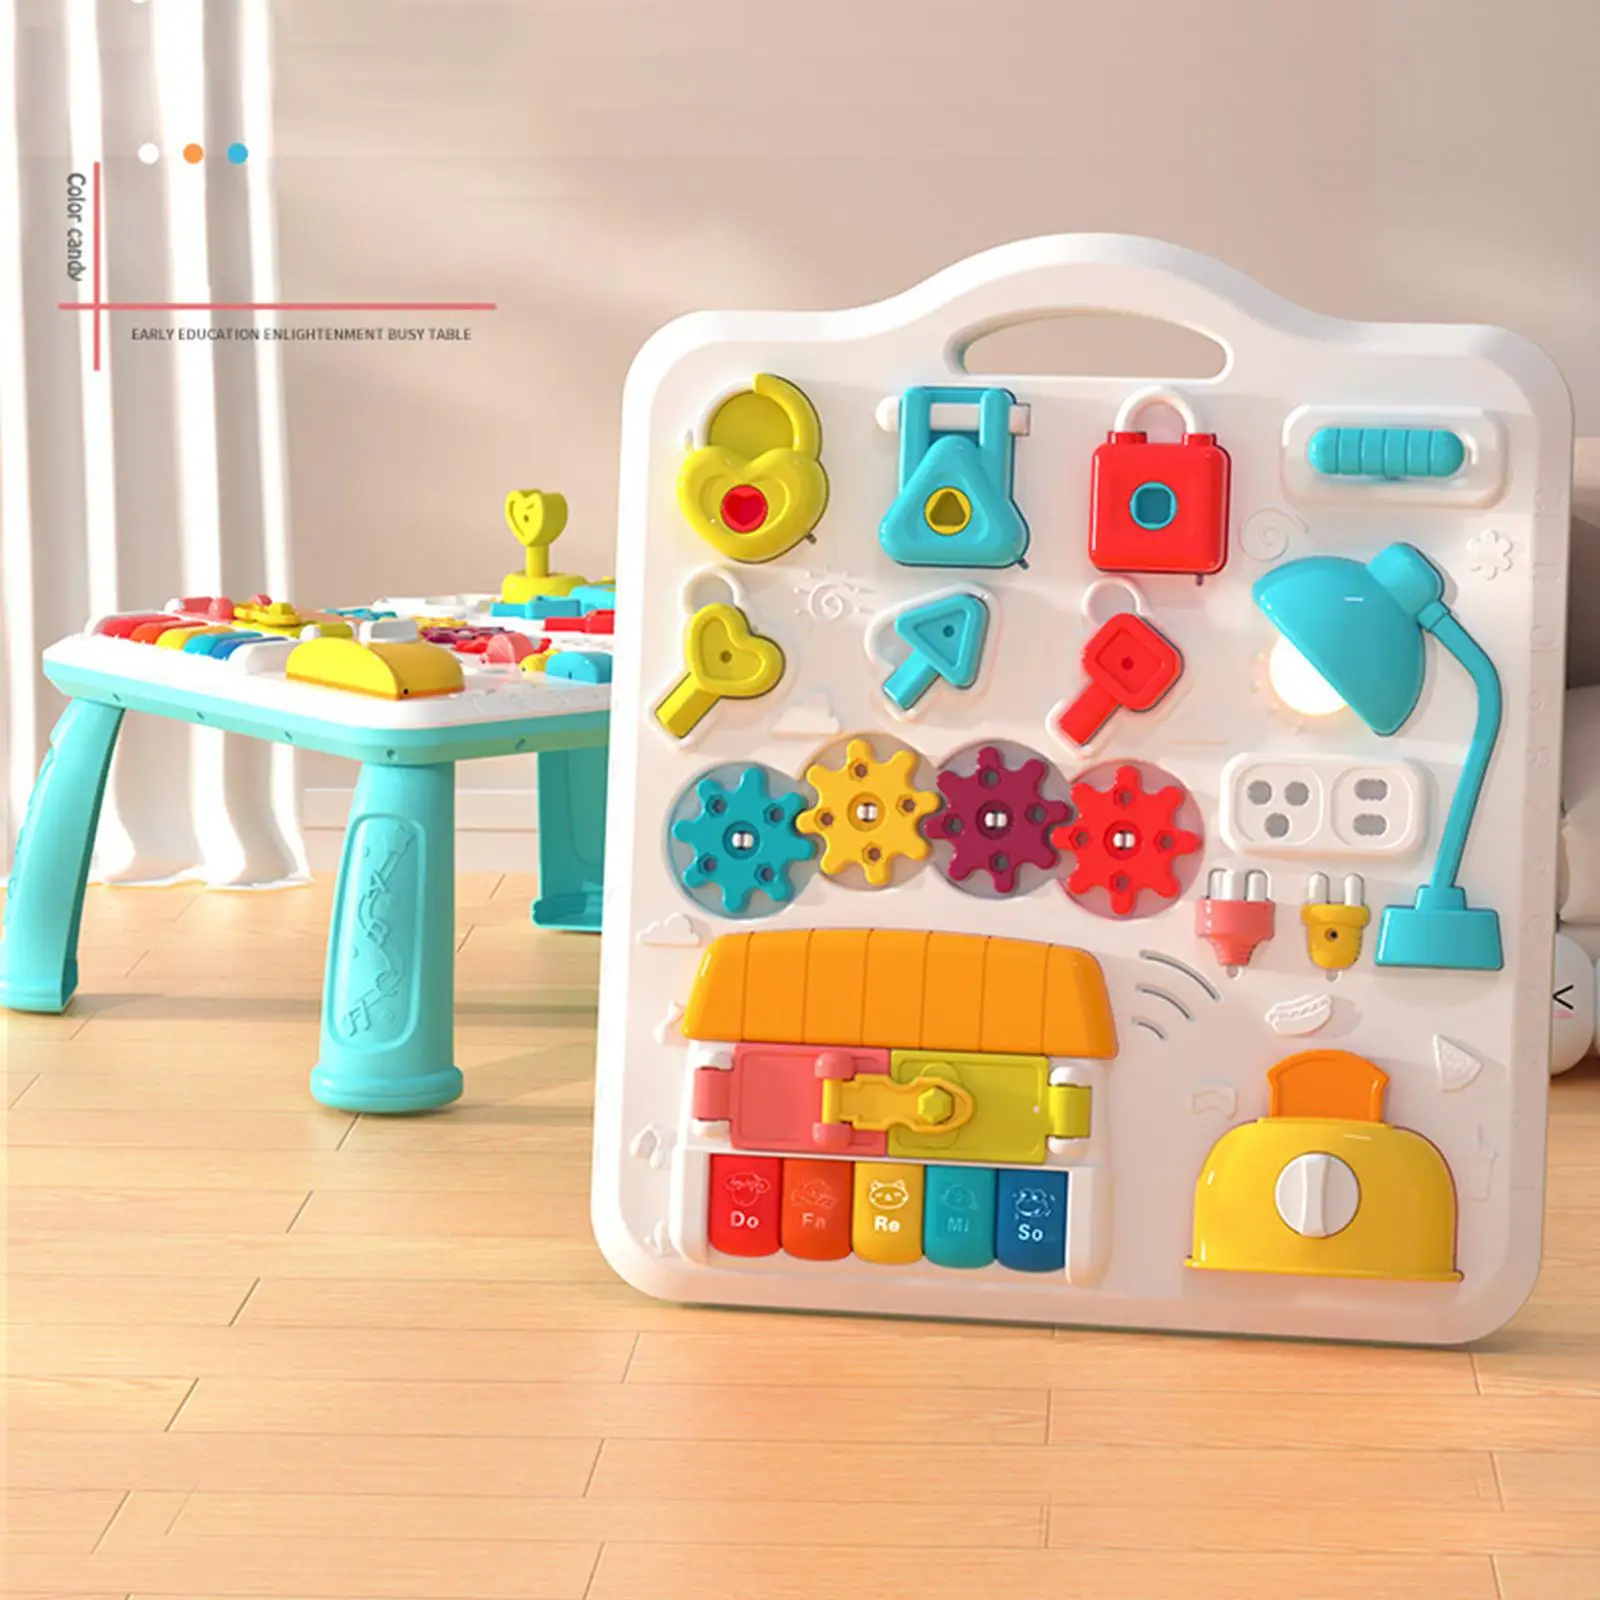 Multifunctional Learning table Teaching Aids Educational Toy for Boys